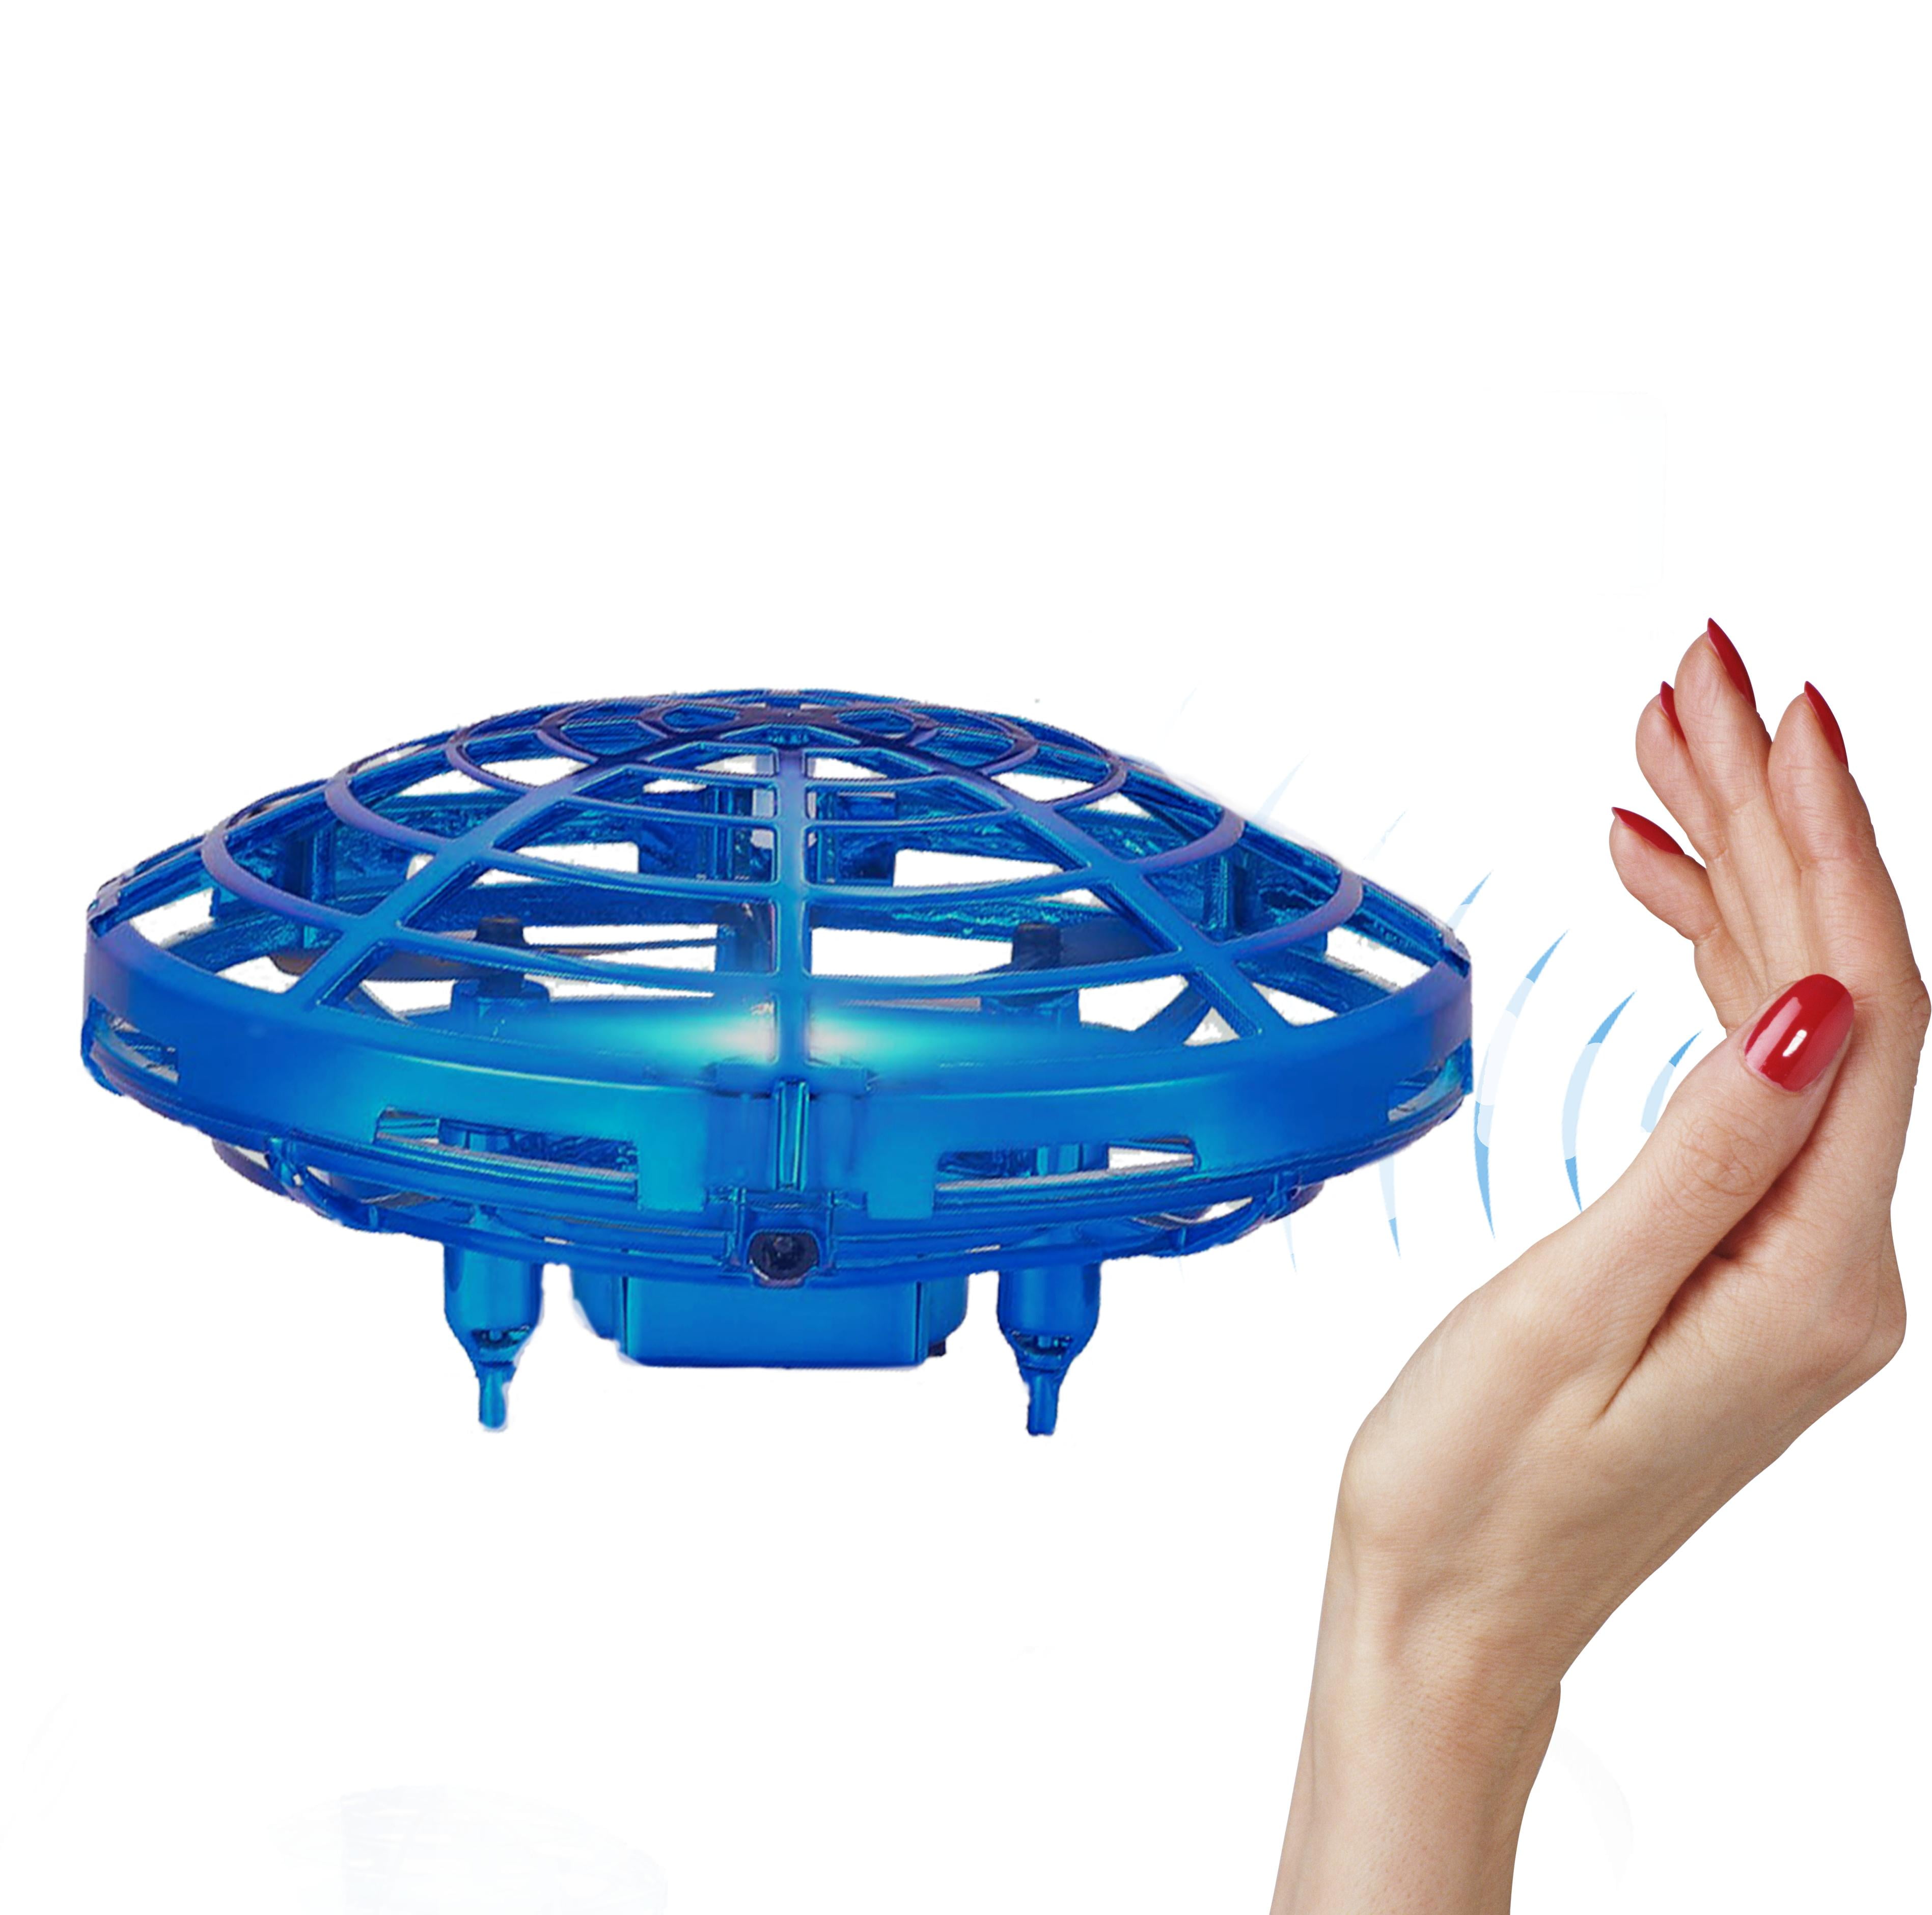 Details about   2021 UFO Mini Drone Kids Toy RC  Infrared Helicopter Quadro copter Hand Operated 